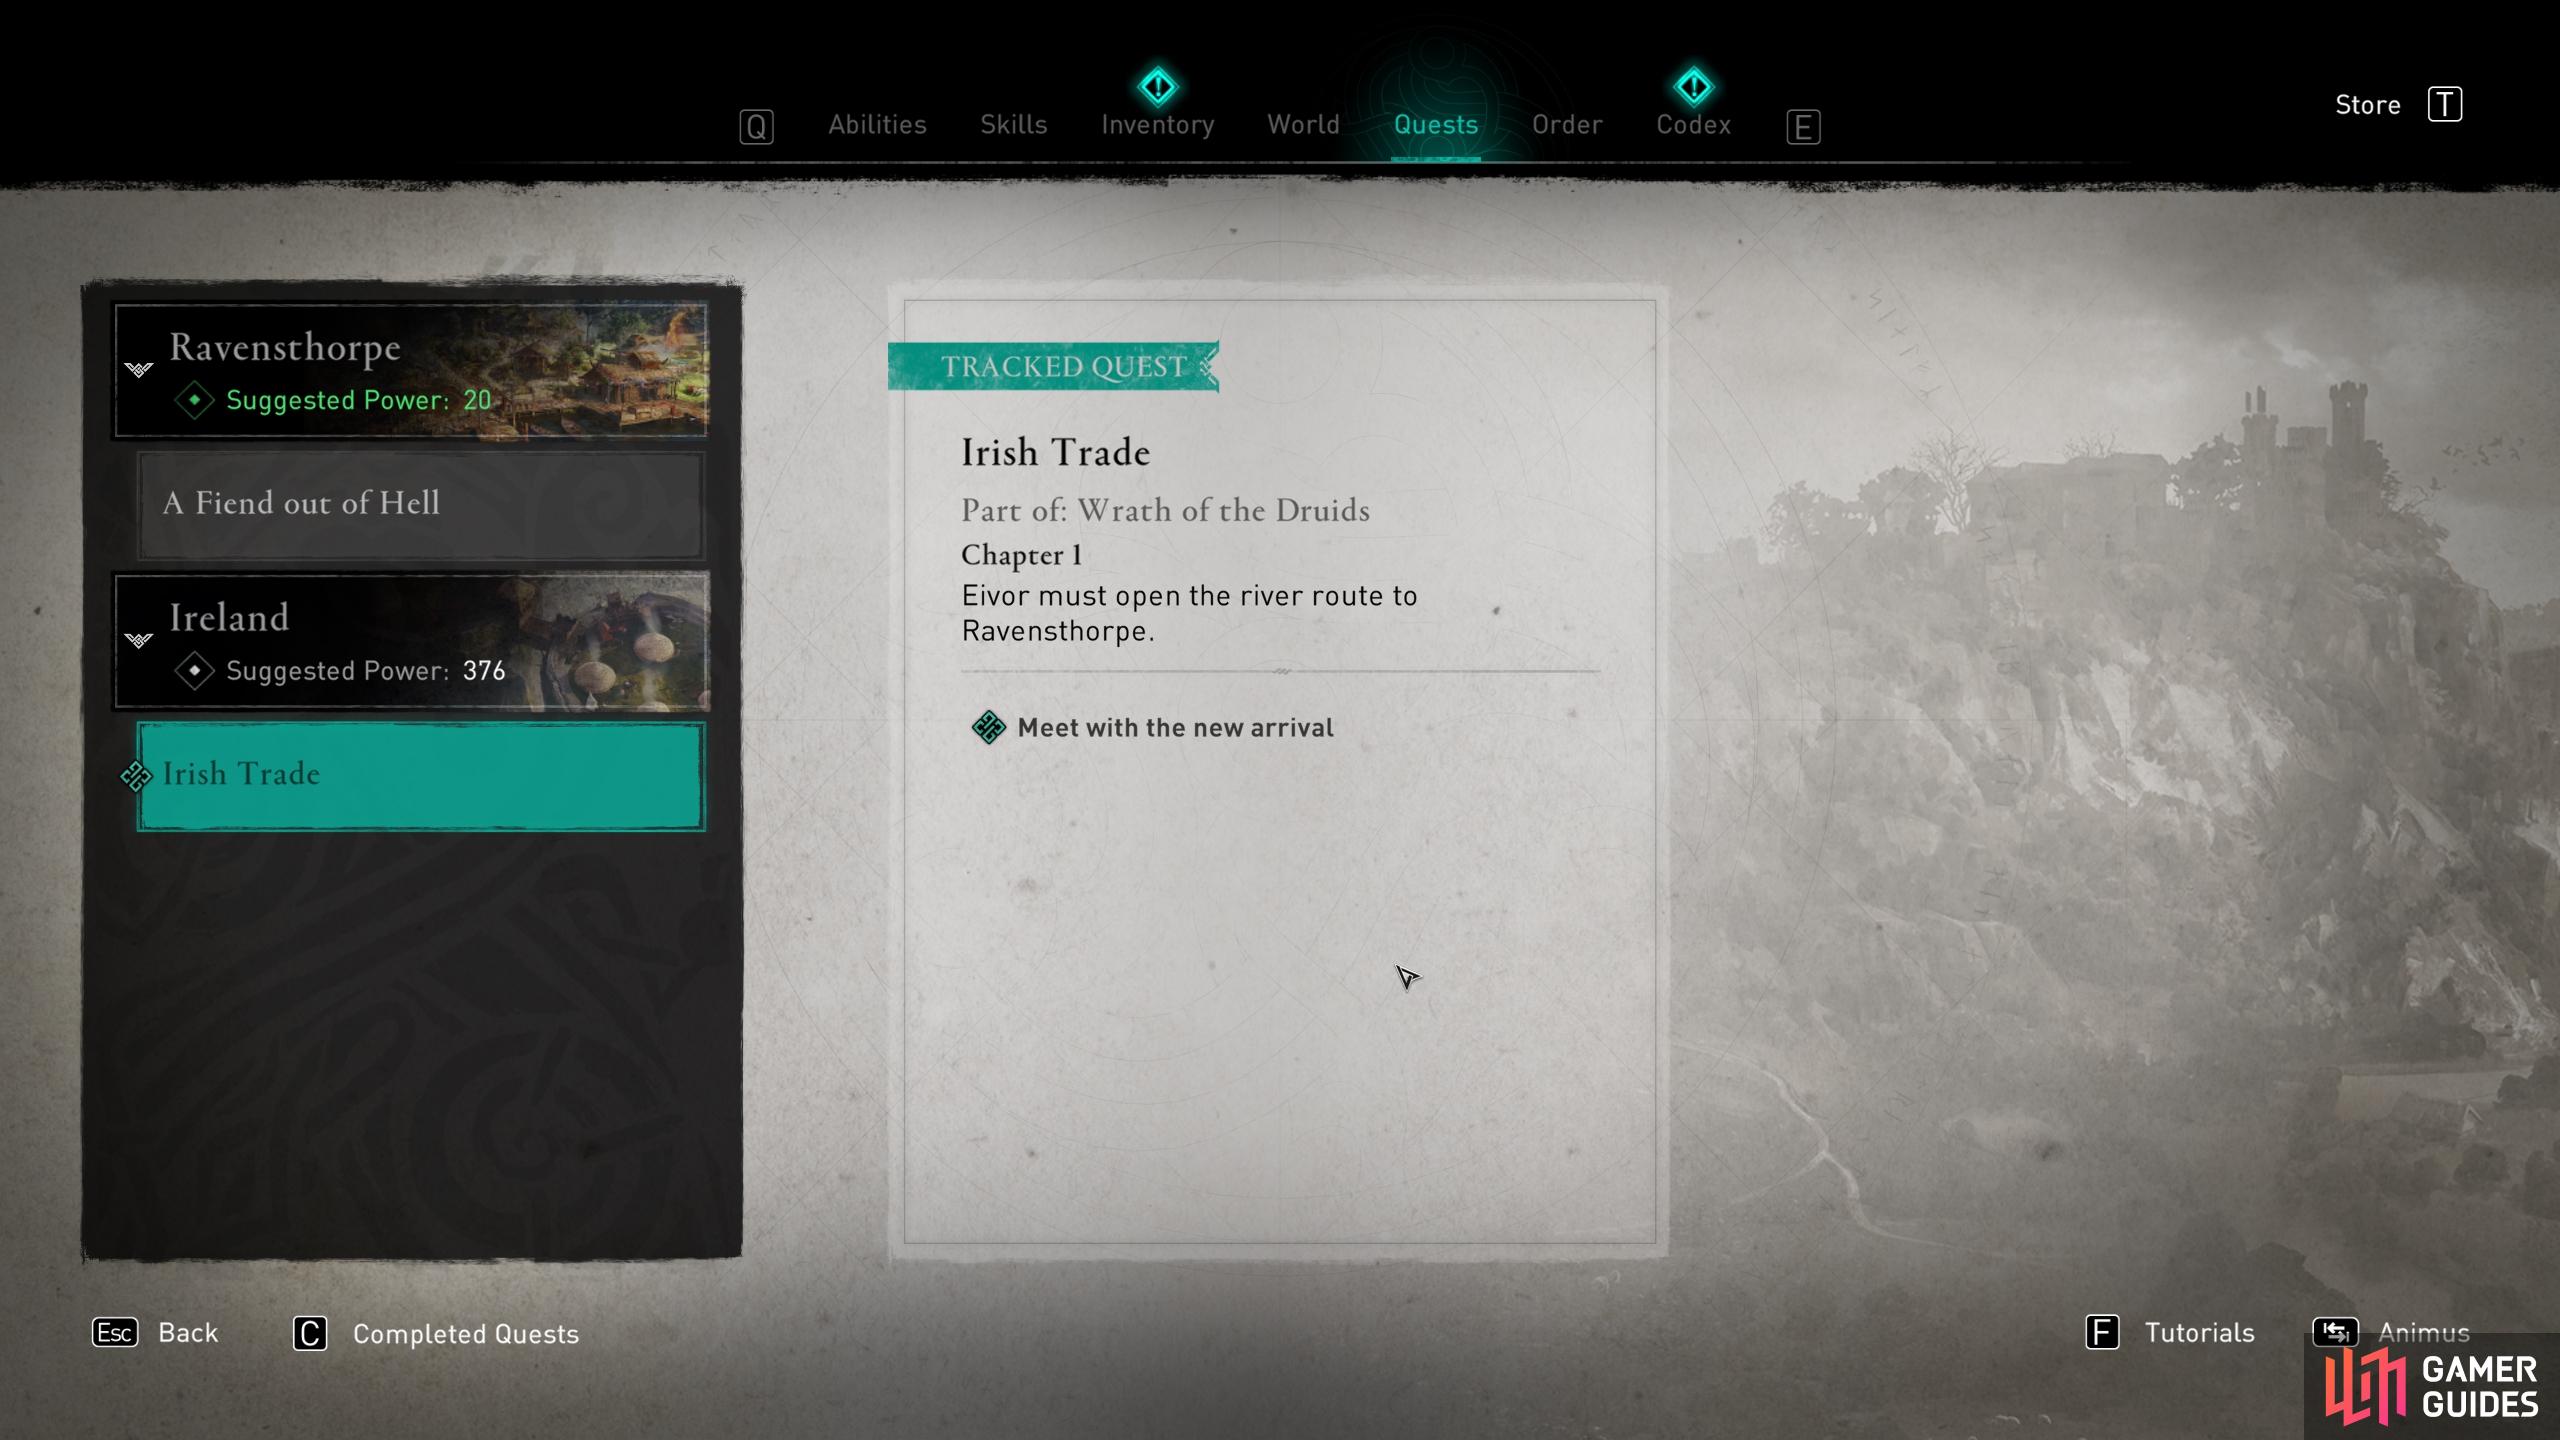 Once you have the DLC, you'll find the Irish Trade quest available in your quest log.